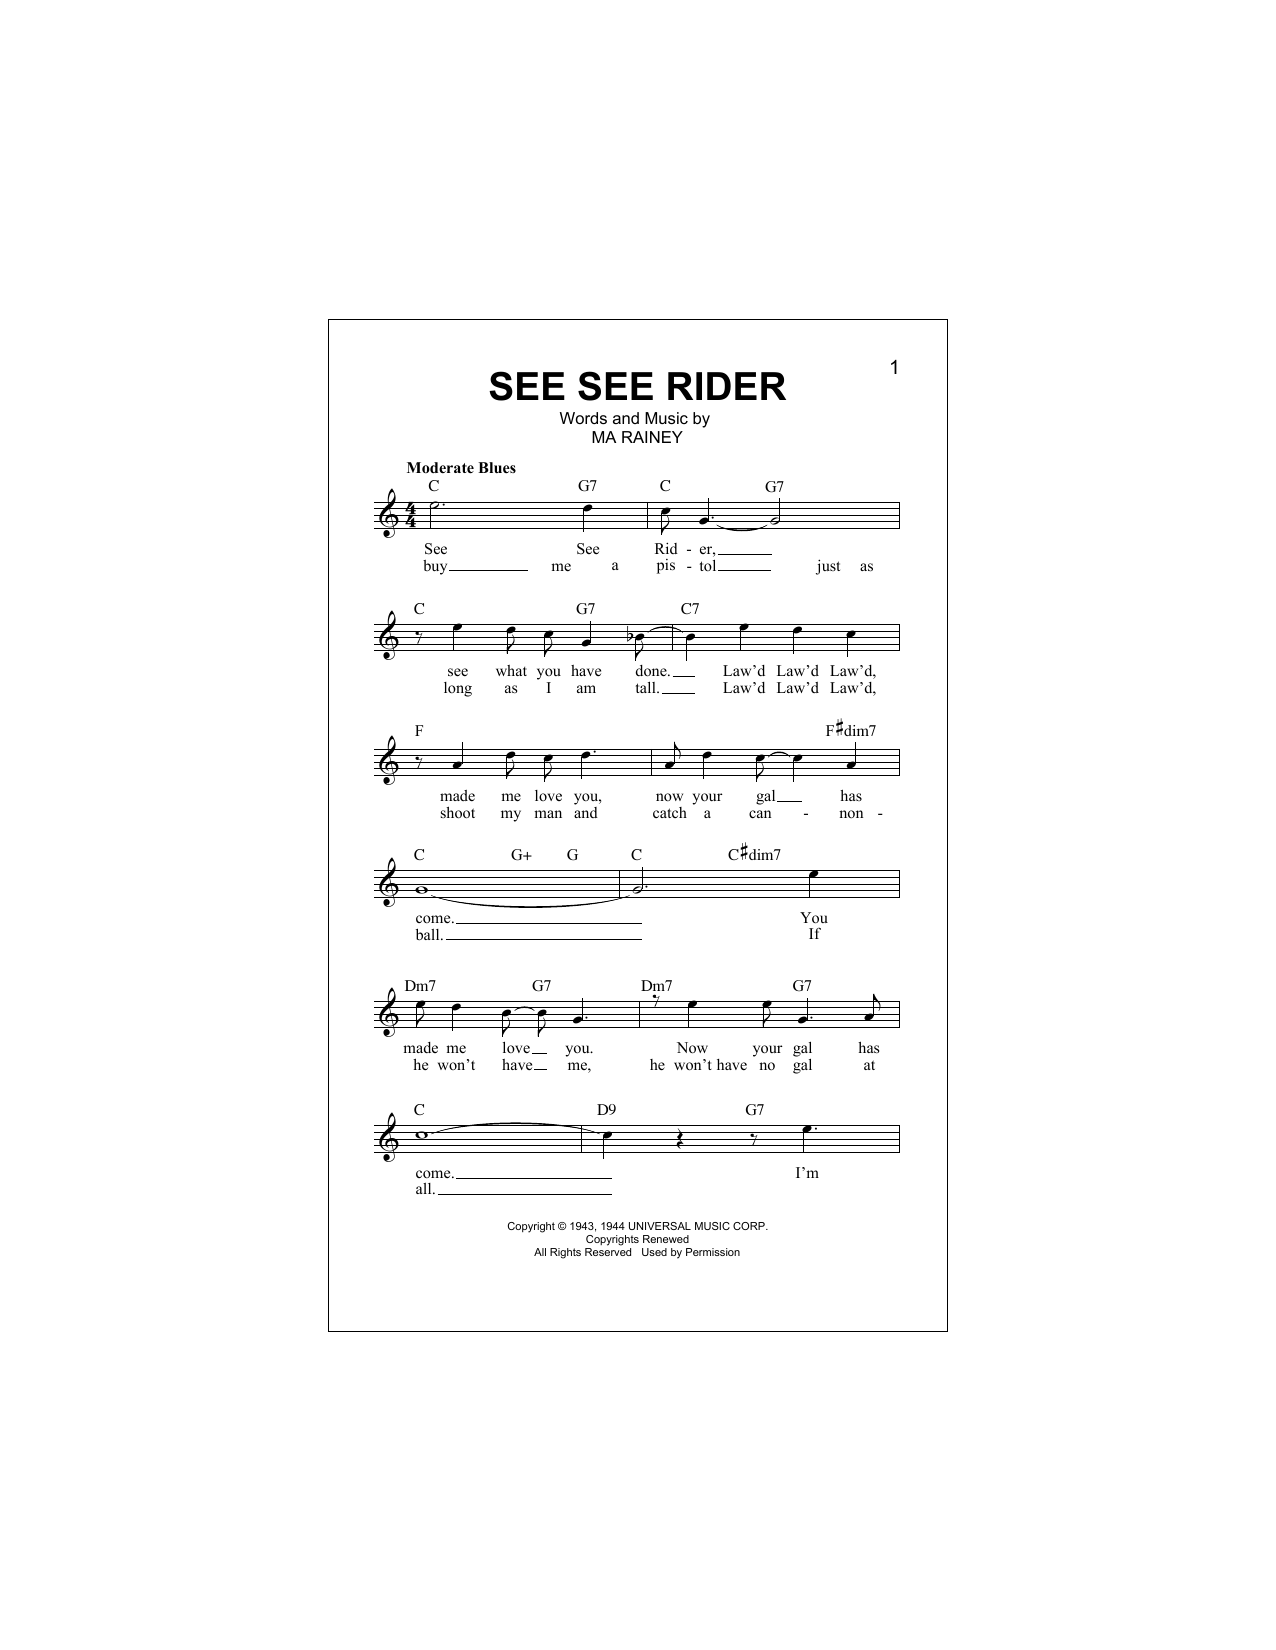 Download Ma Rainey See See Rider Sheet Music